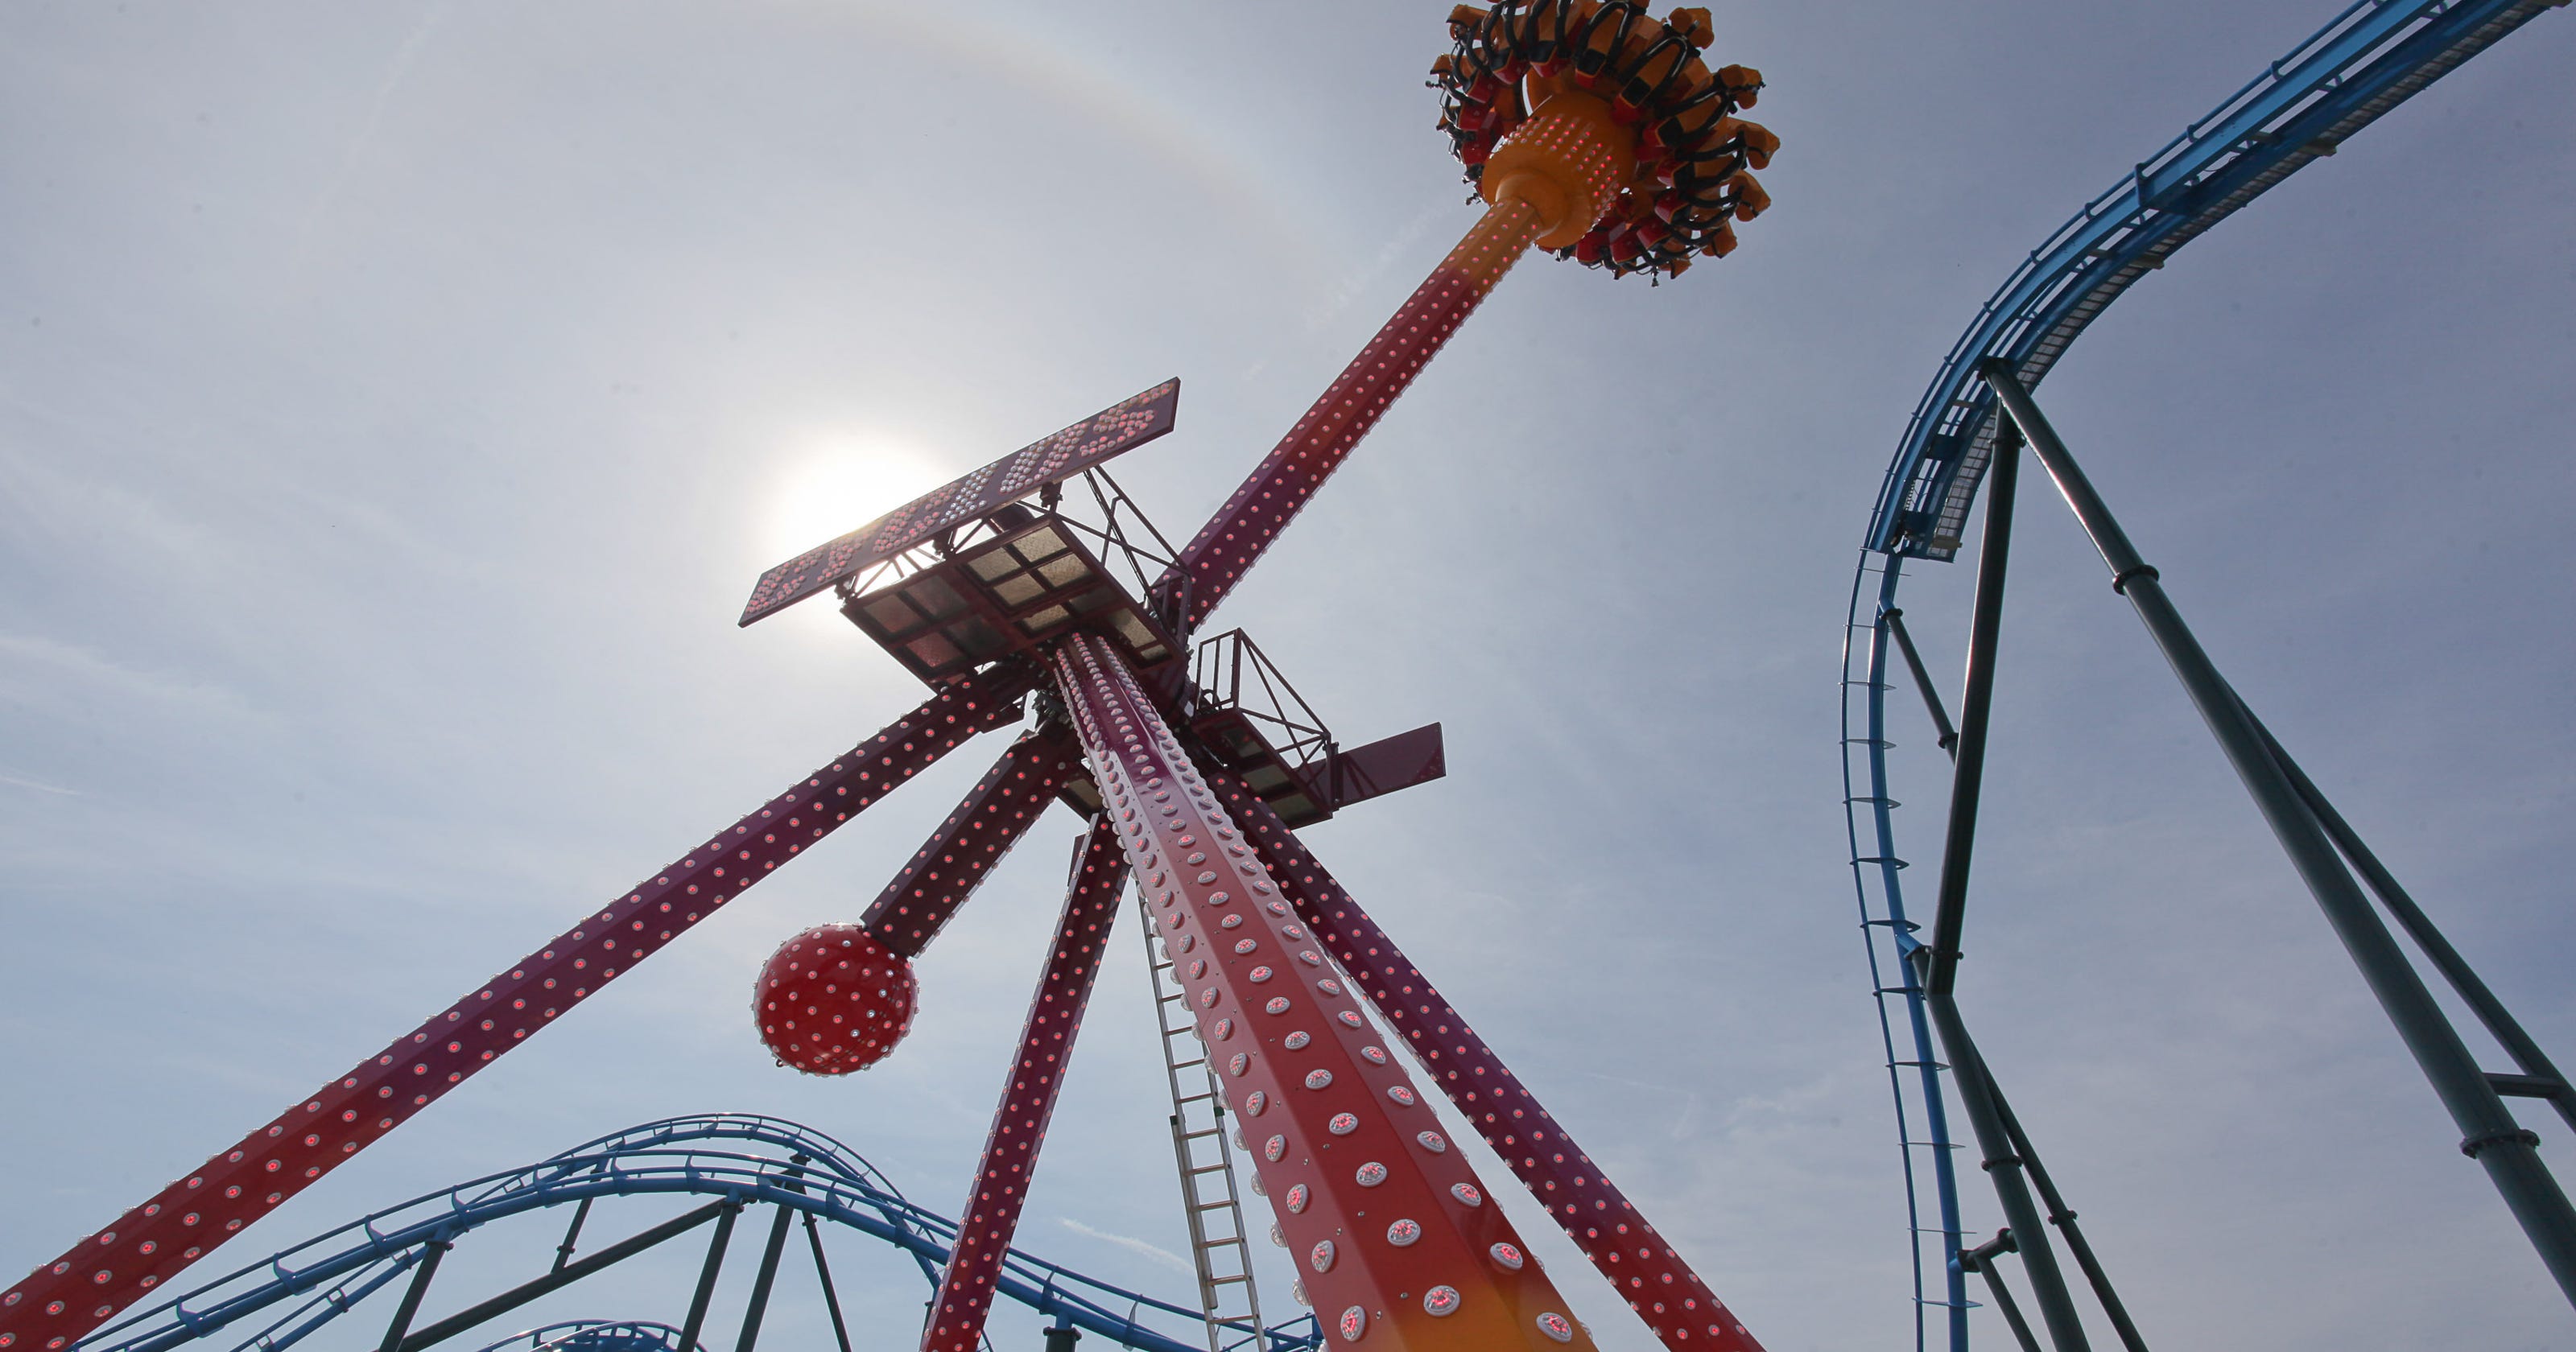 Eight new rides debut at Kentucky Kingdom